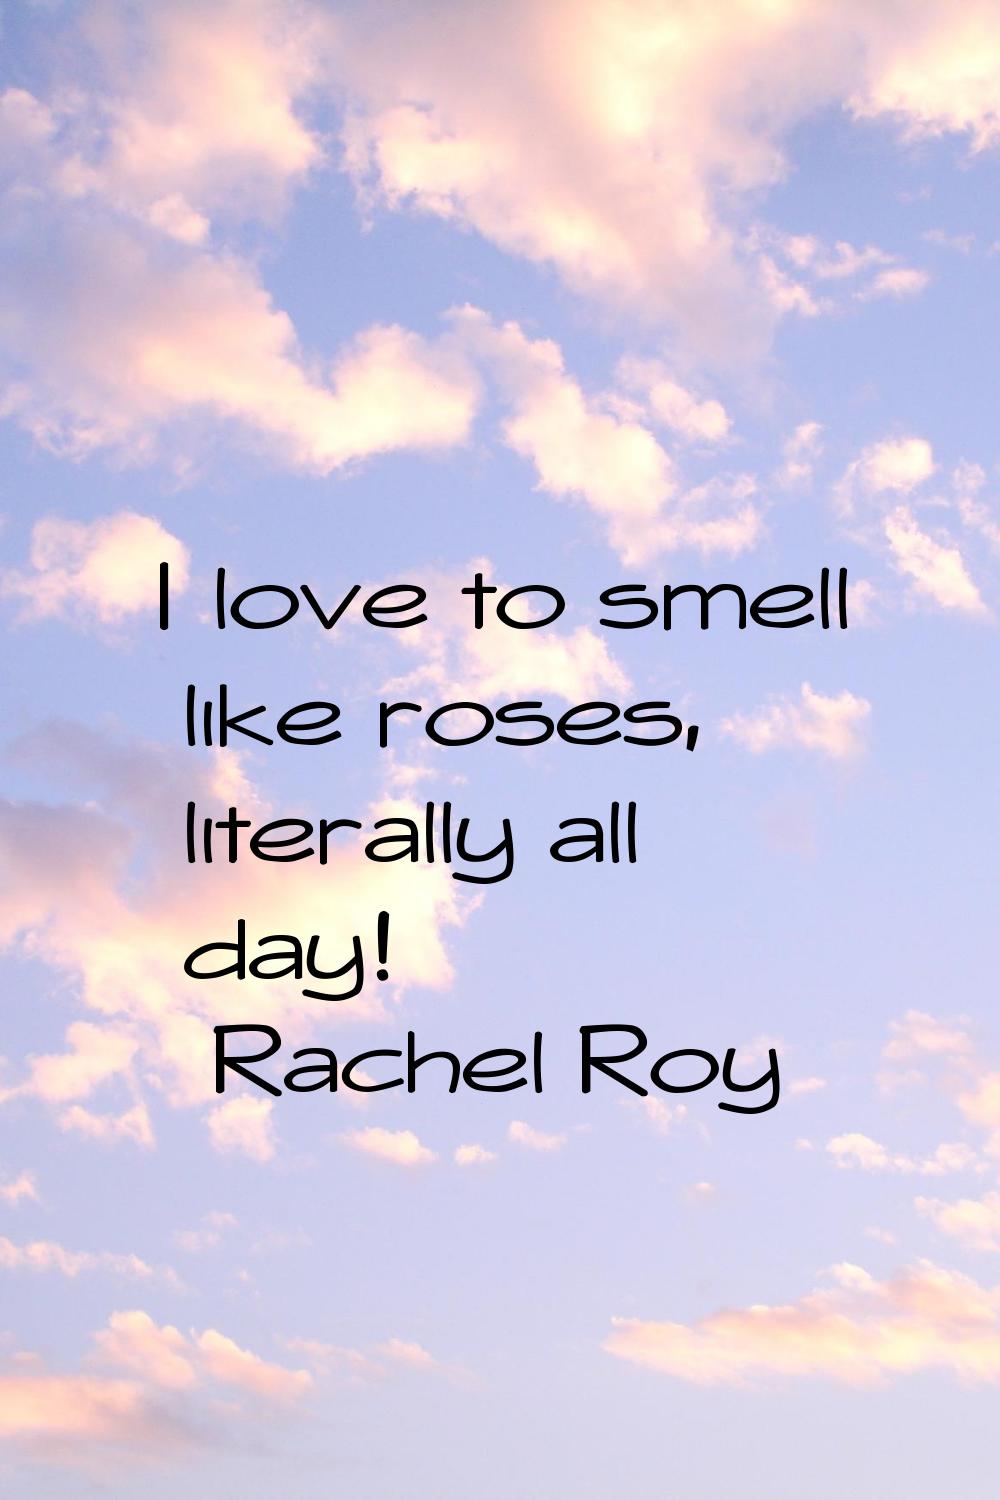 I love to smell like roses, literally all day!